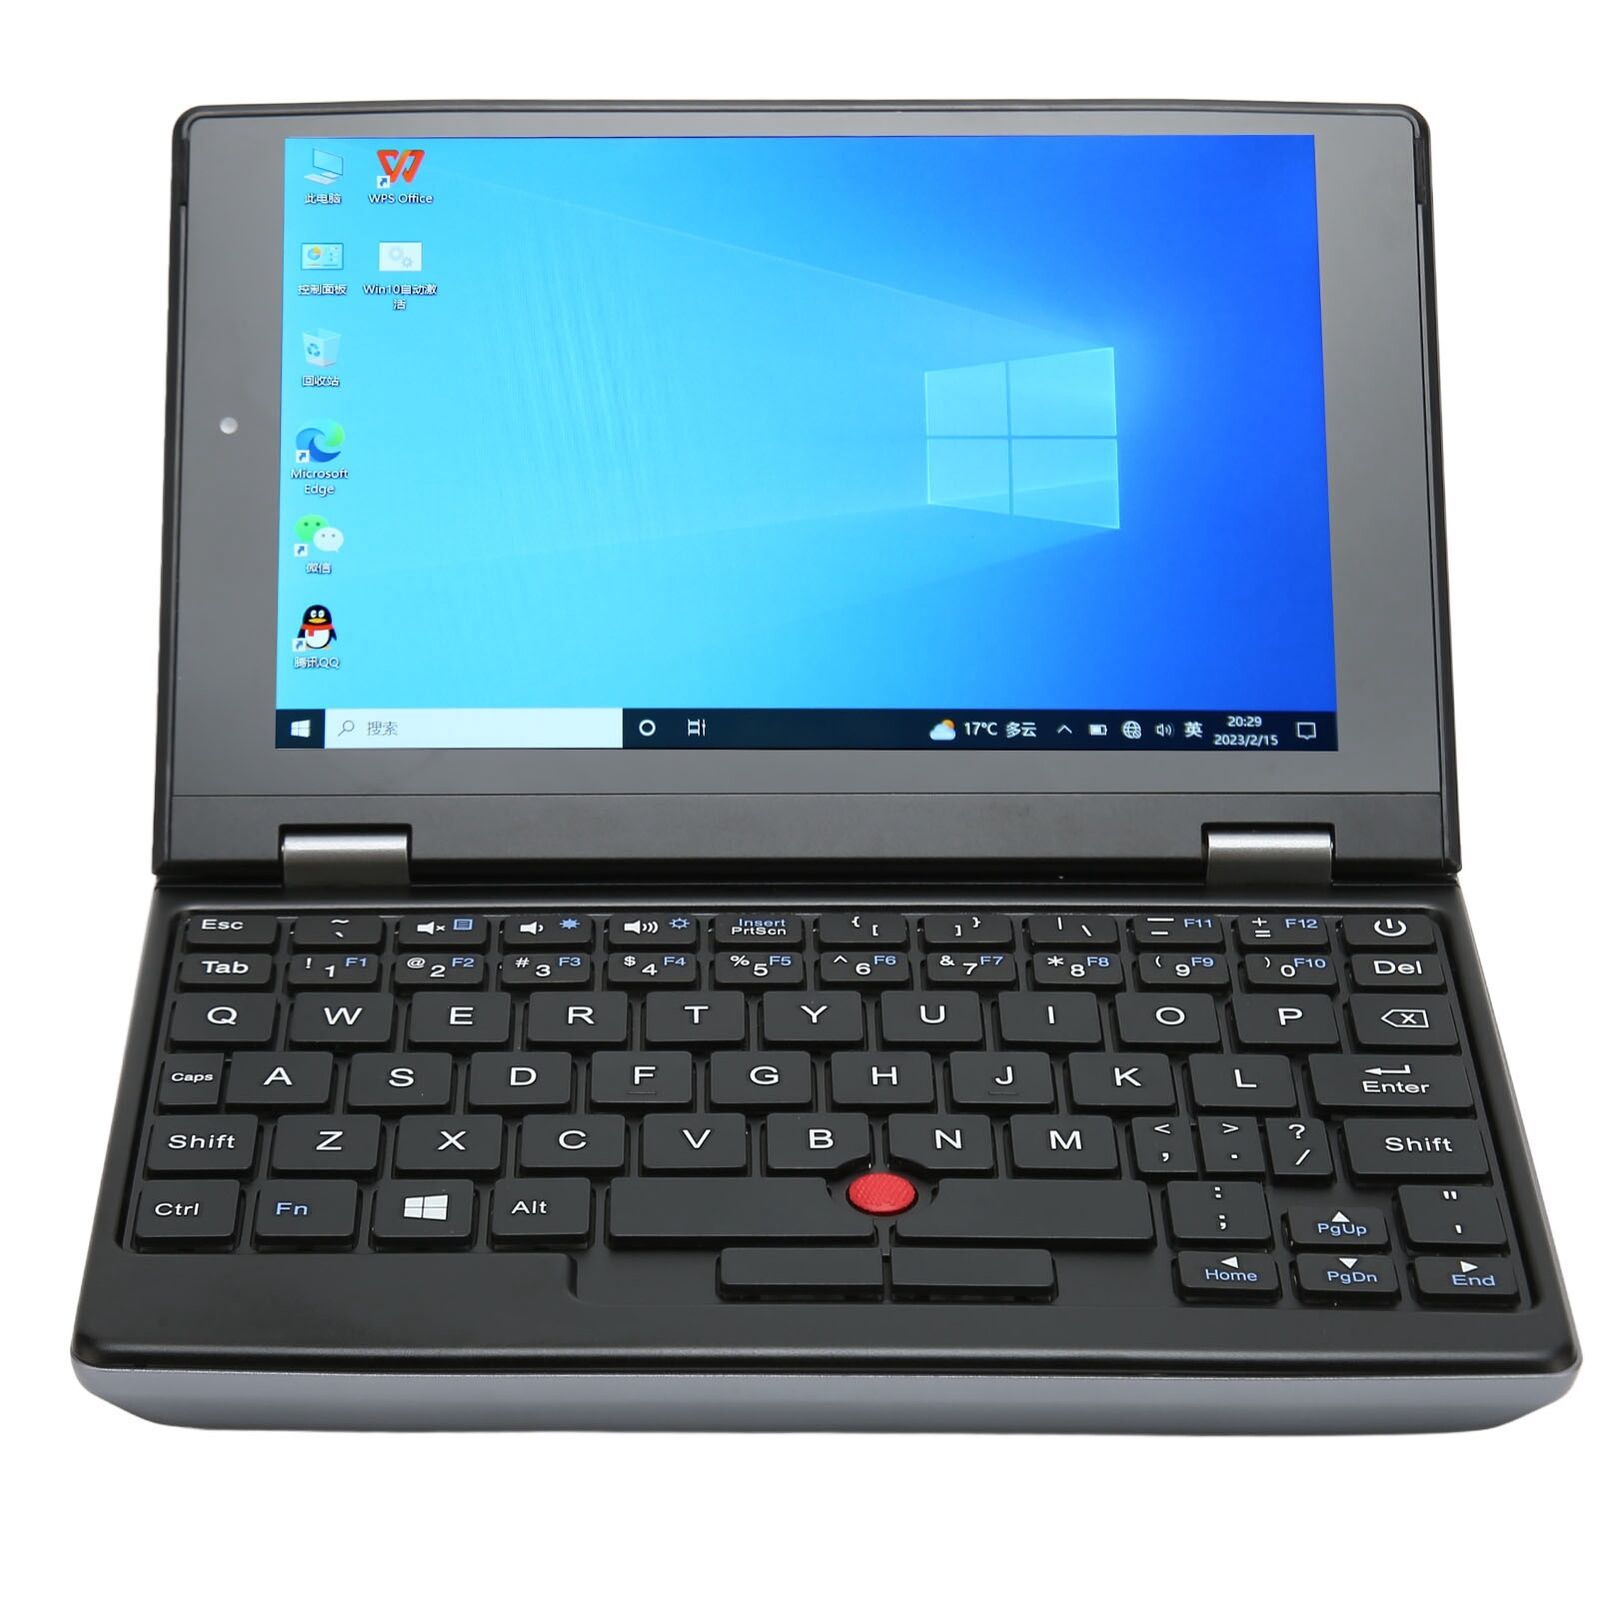 Notebook Computer Mini Laptop 12GB RAM 7 Inch For Office